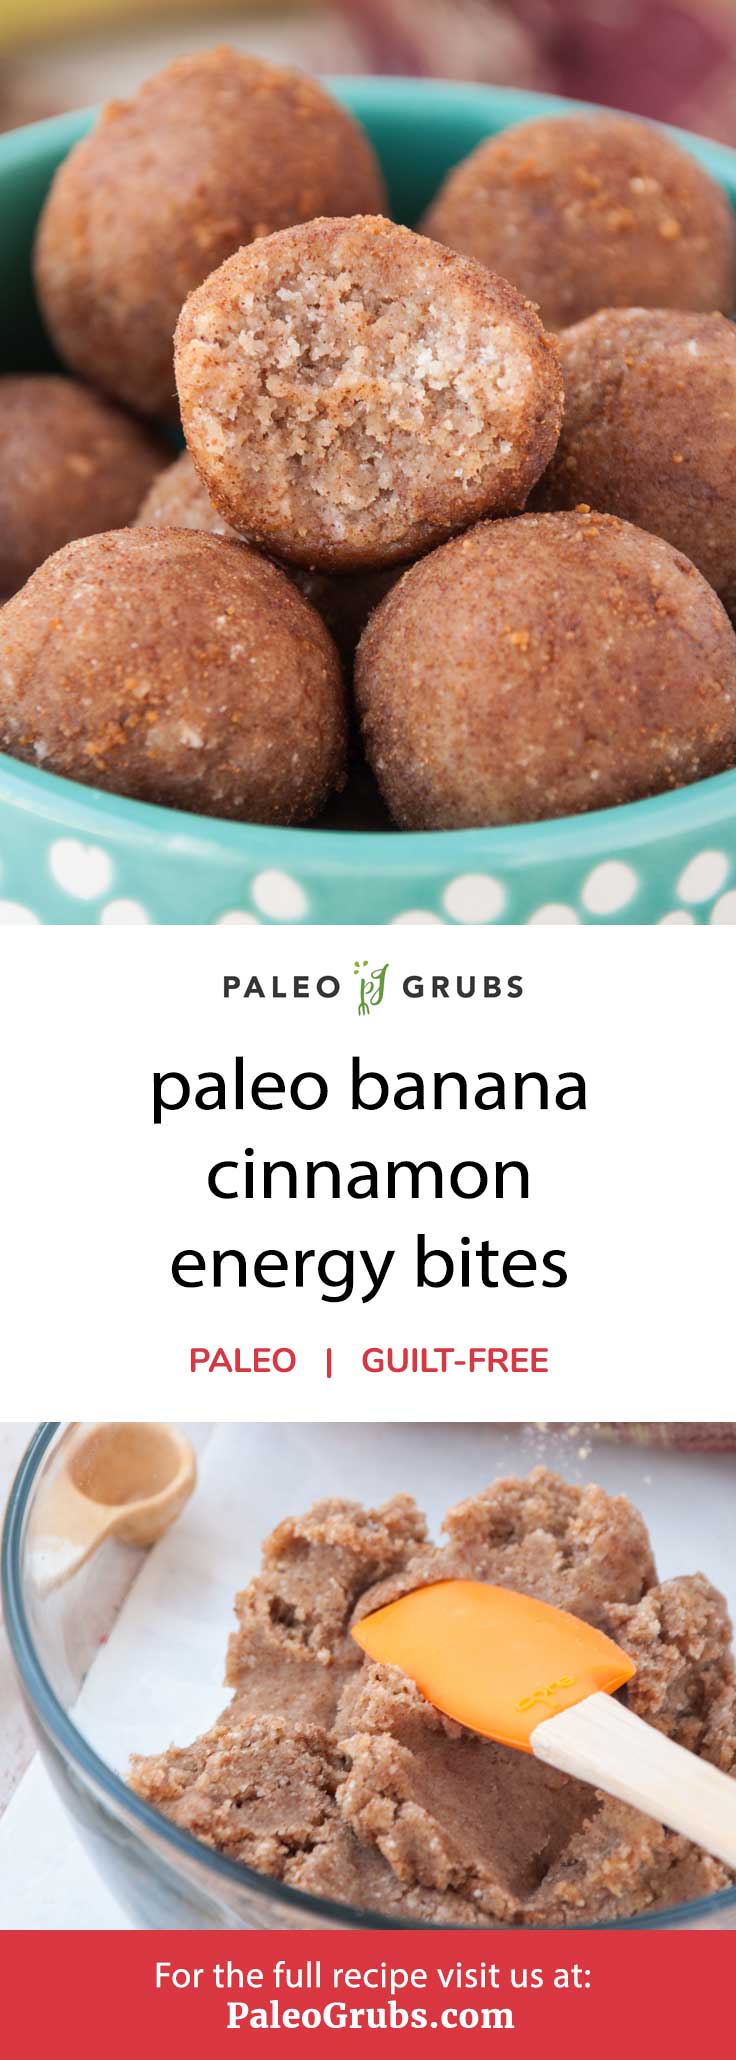 These energy balls are so good!